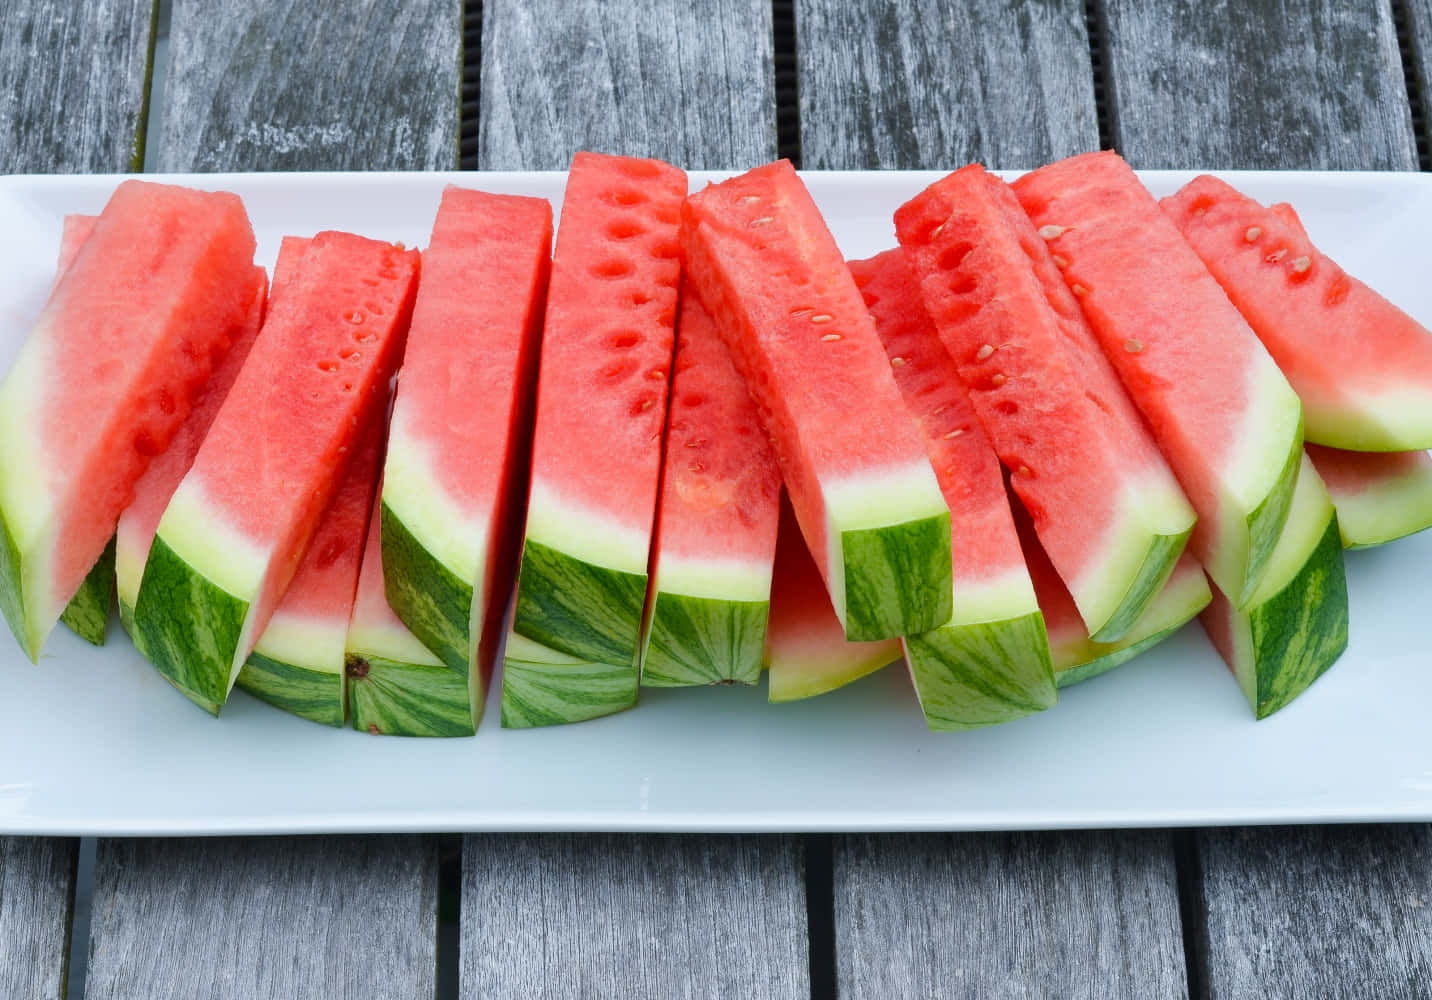 Watermelon Slices On A White Plate